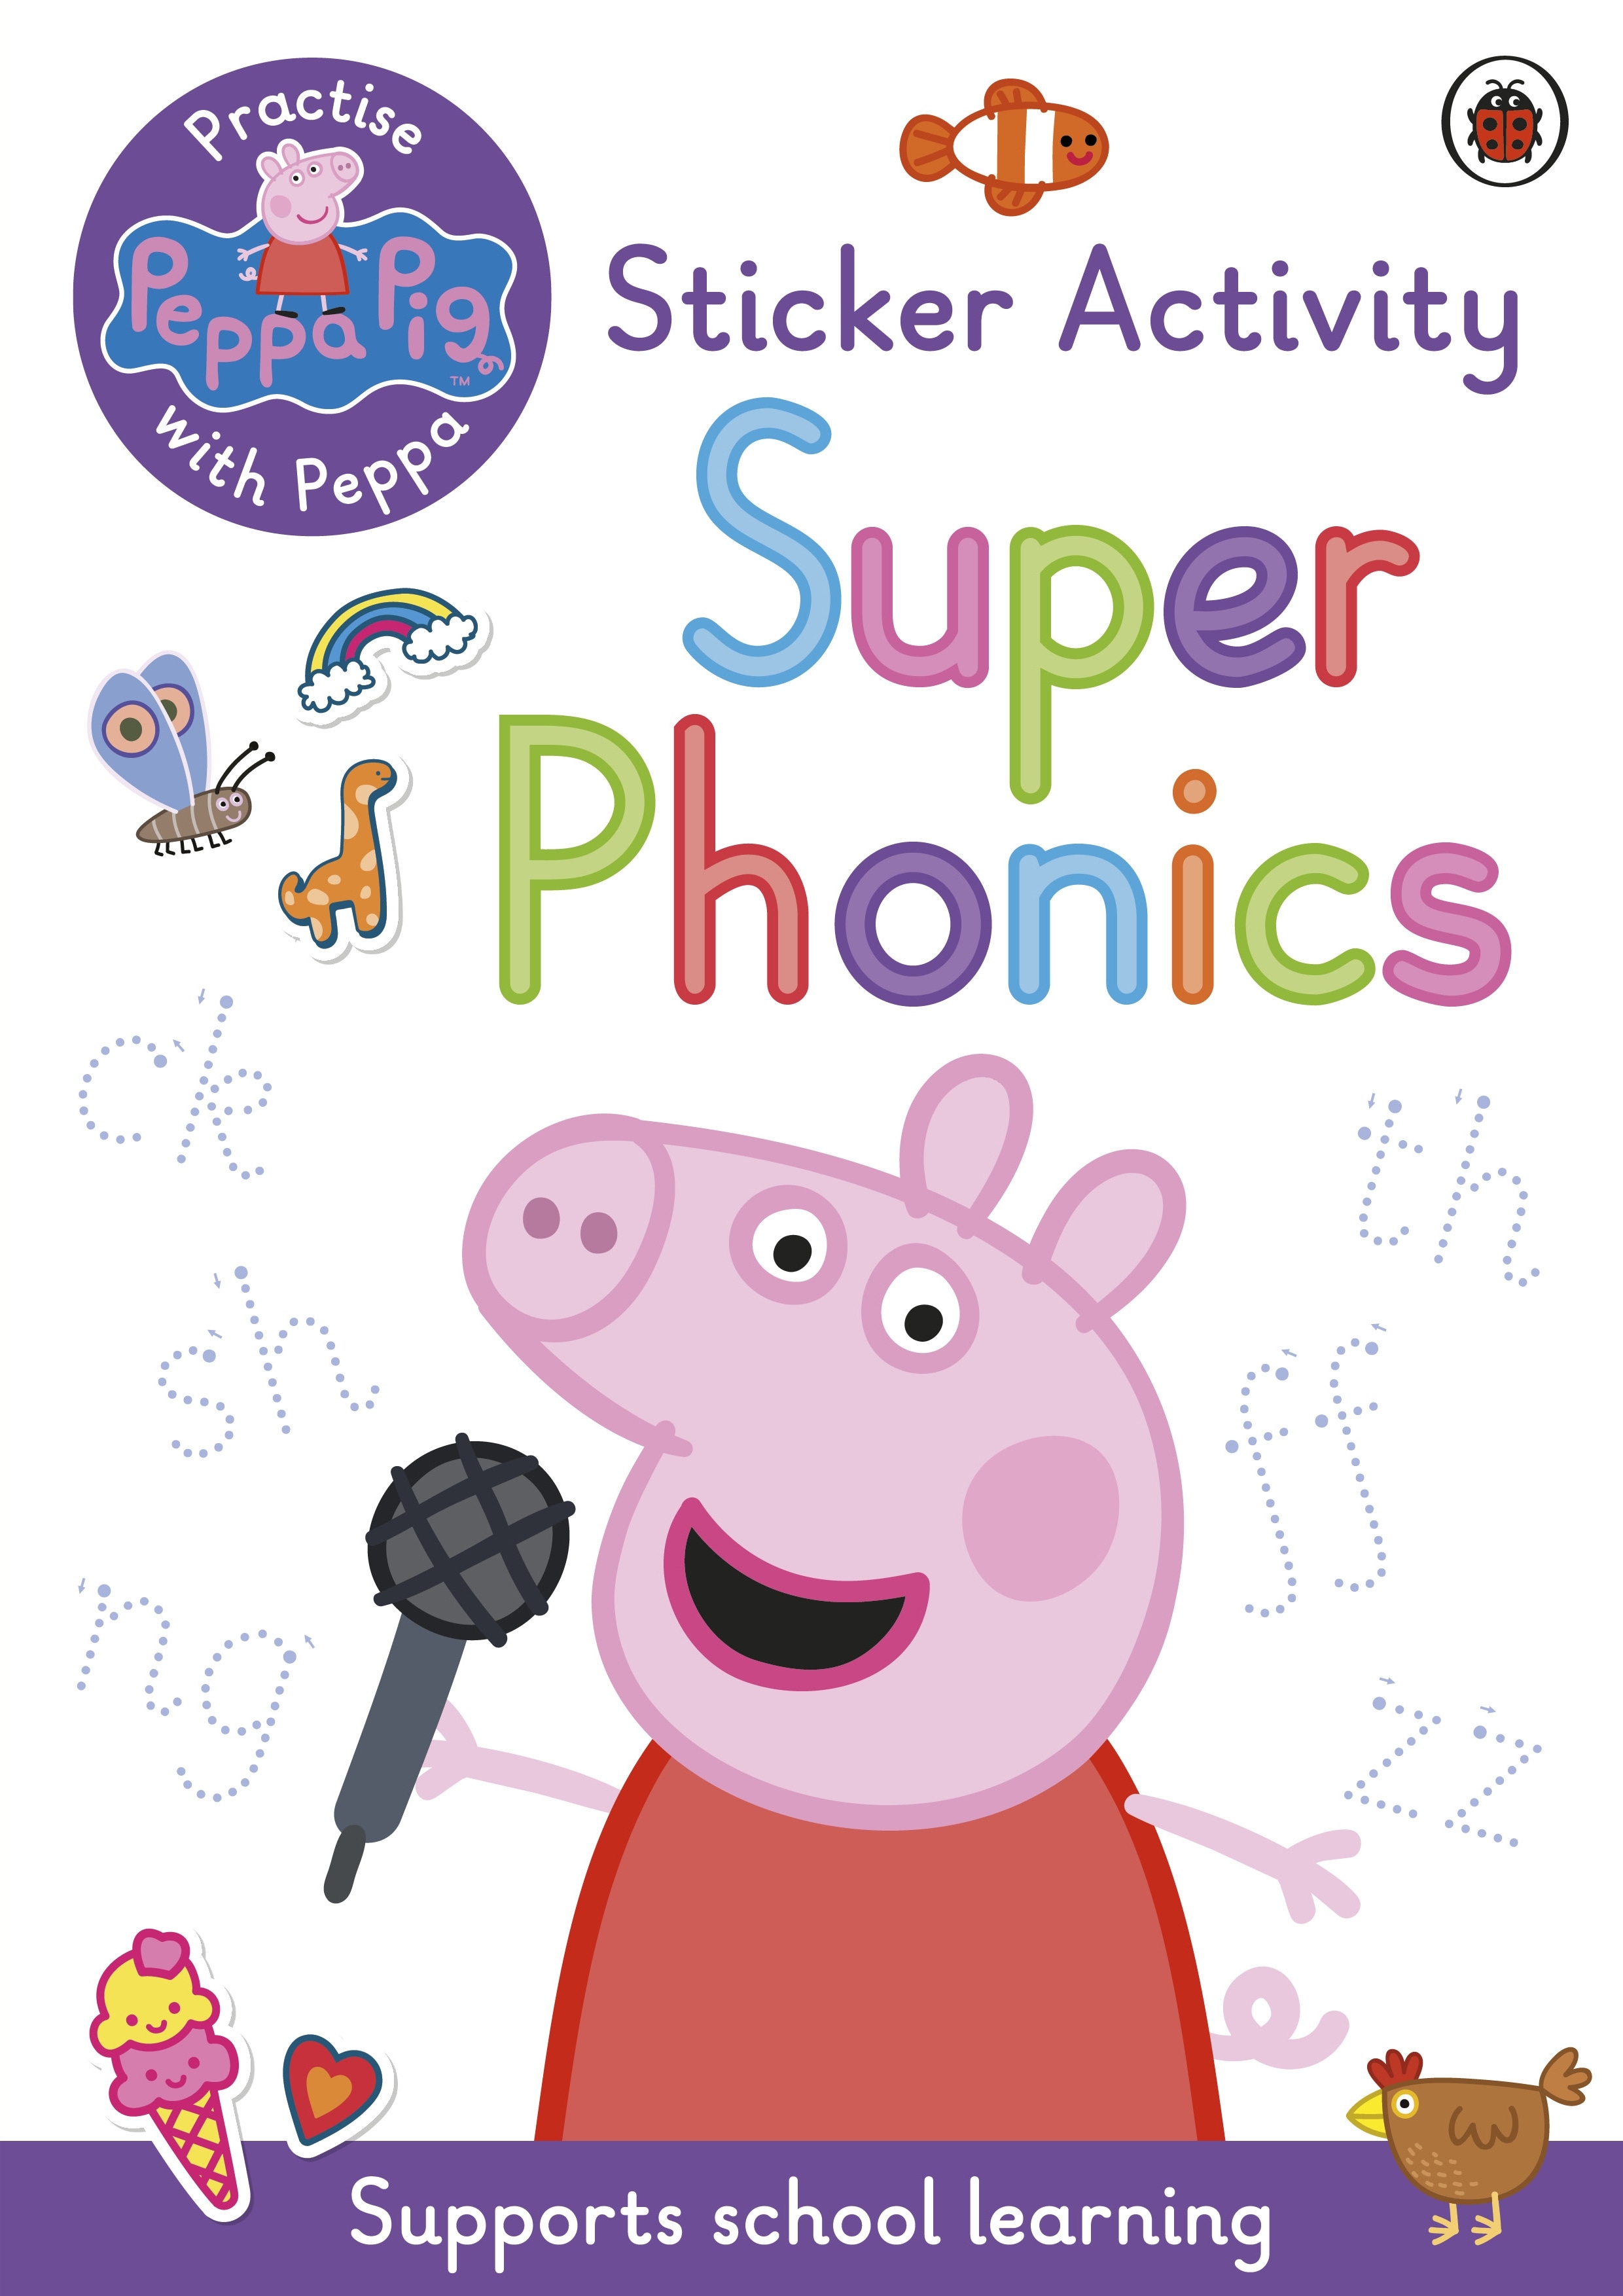 Book “Peppa Pig: Practise with Peppa: Super Phonics” by Peppa Pig — July 22, 2021